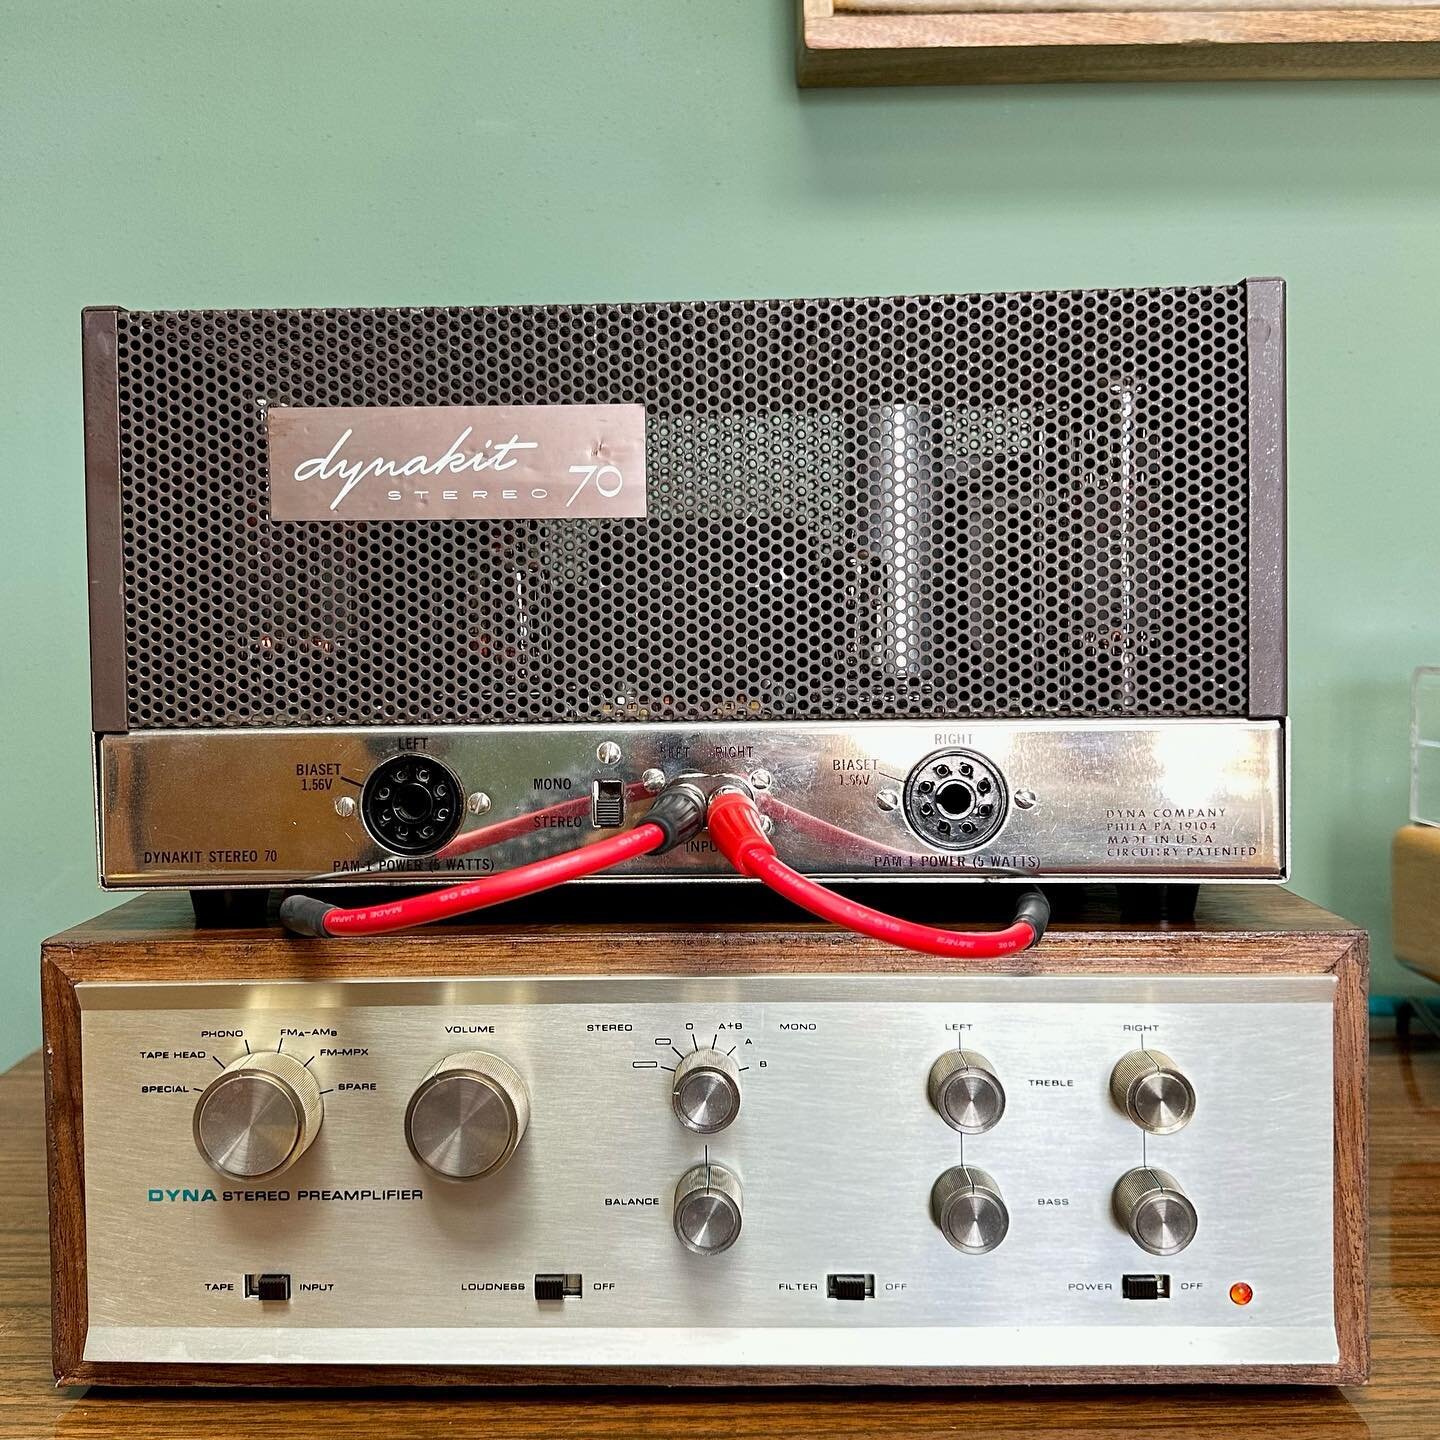 [AVAILABLE] For those of us who know and love vintage tube amps todays offering needs no introduction.
This fully-restored Dynaco ST-70 power amp and PAS-2 preamp are arguably the best selling tube pieces of all time, with 400,000+ confirmed sales by